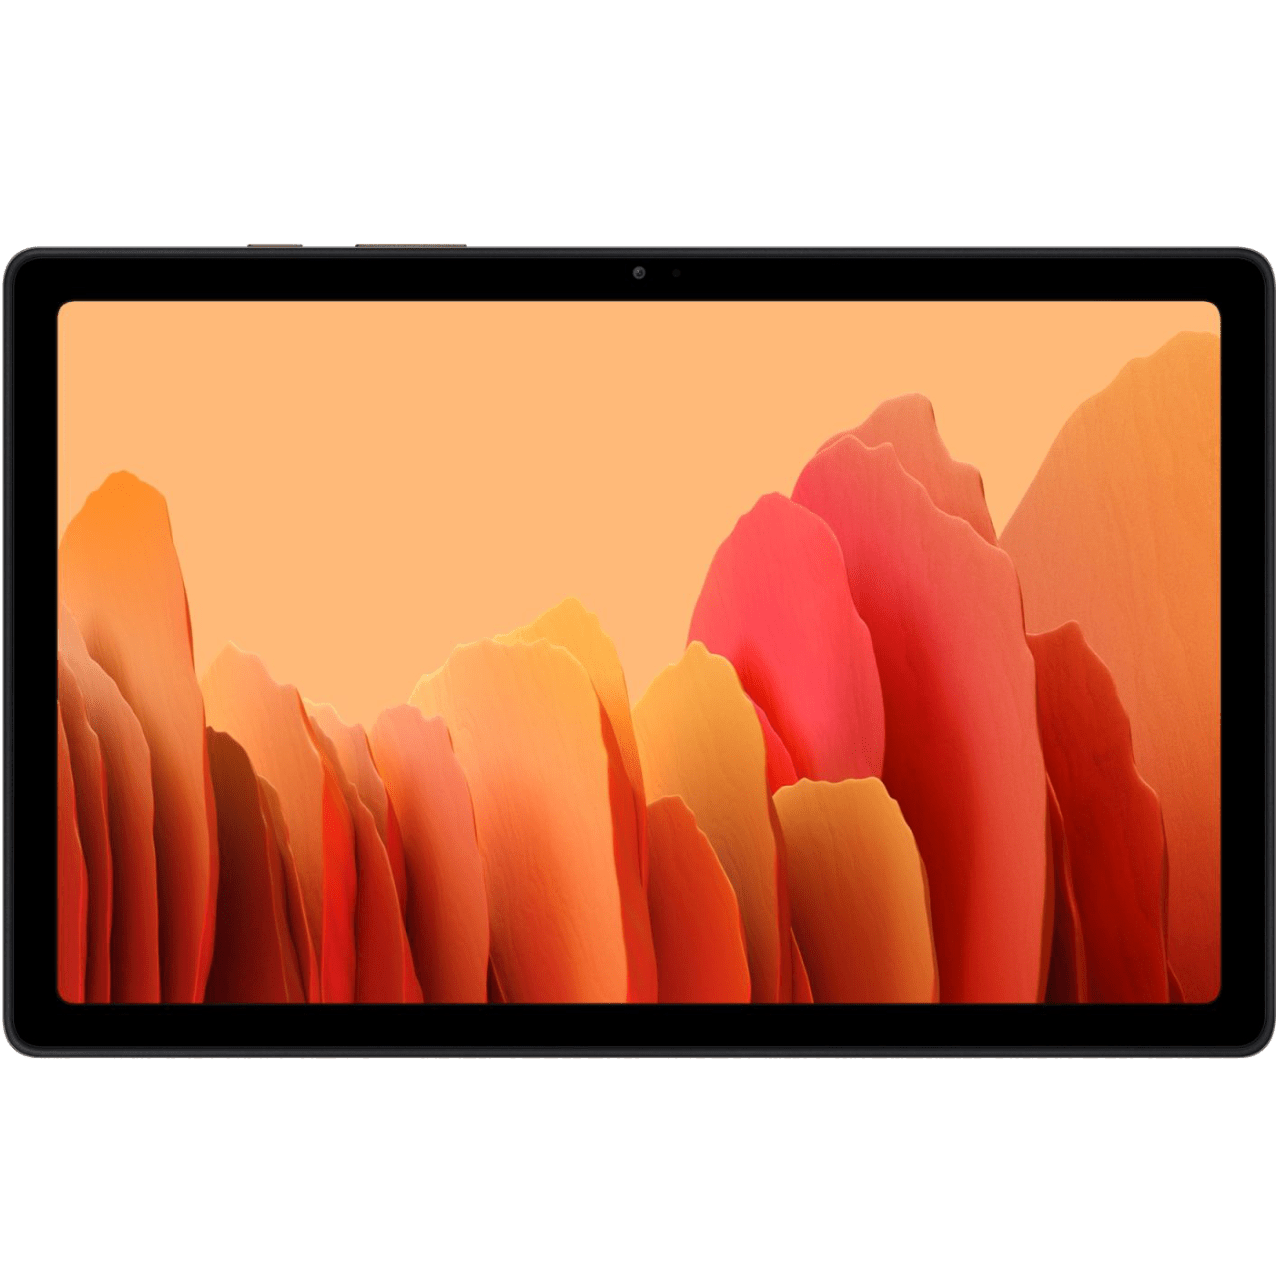 https://images.frandroid.com/wp-content/uploads/2020/09/samsung-galaxy-tab-a7-frandroid-2020.png